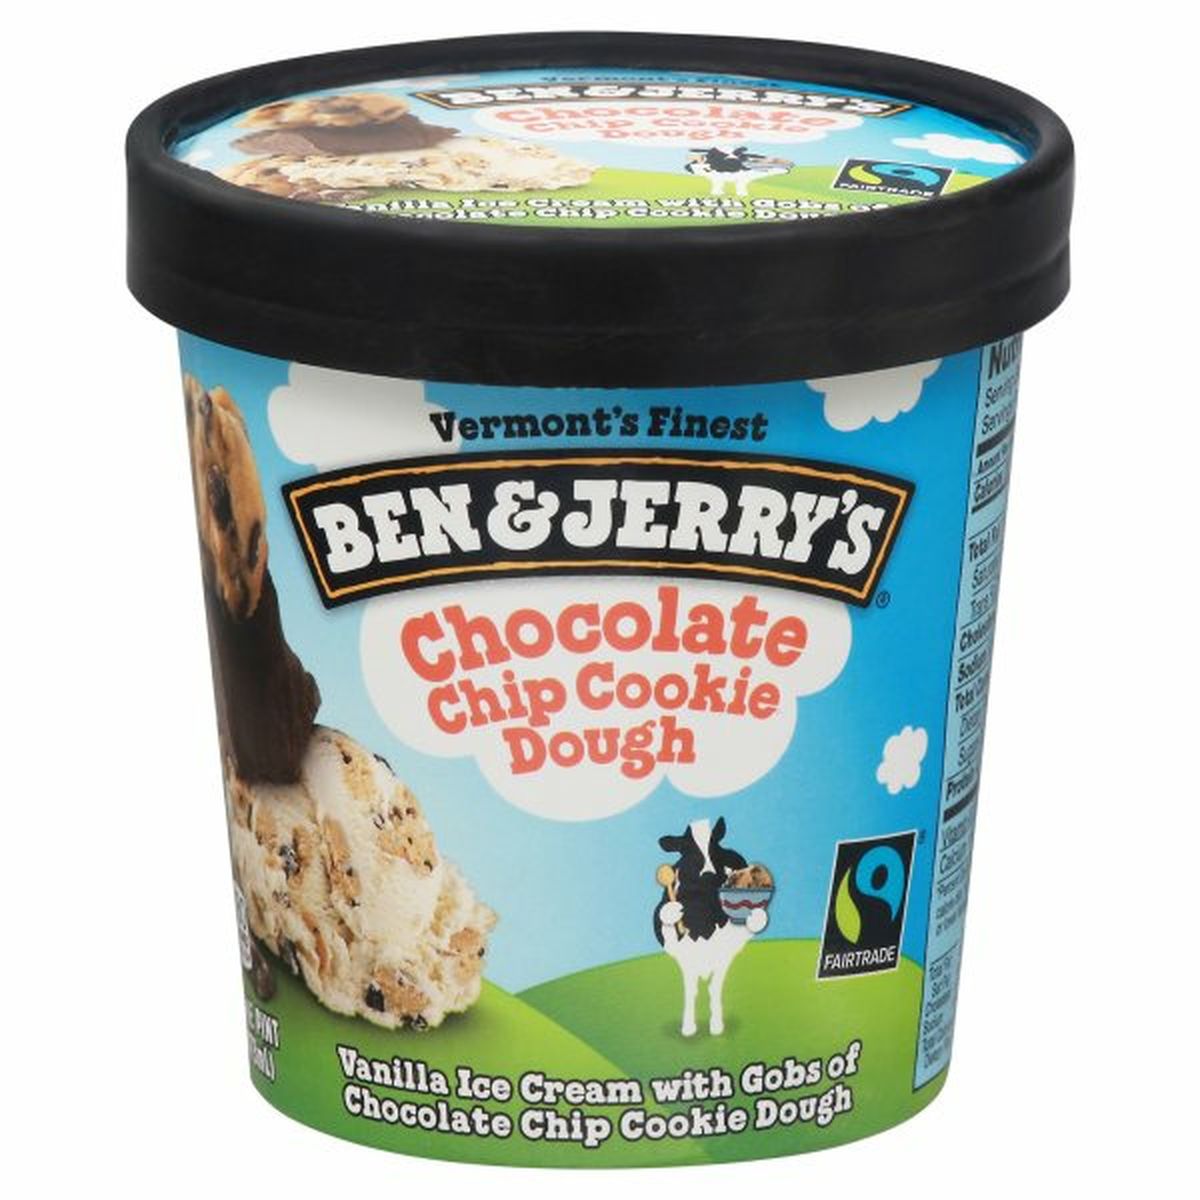 Calories in Ben & Jerry's Ice Cream, Chocolate Chip Cookie Dough